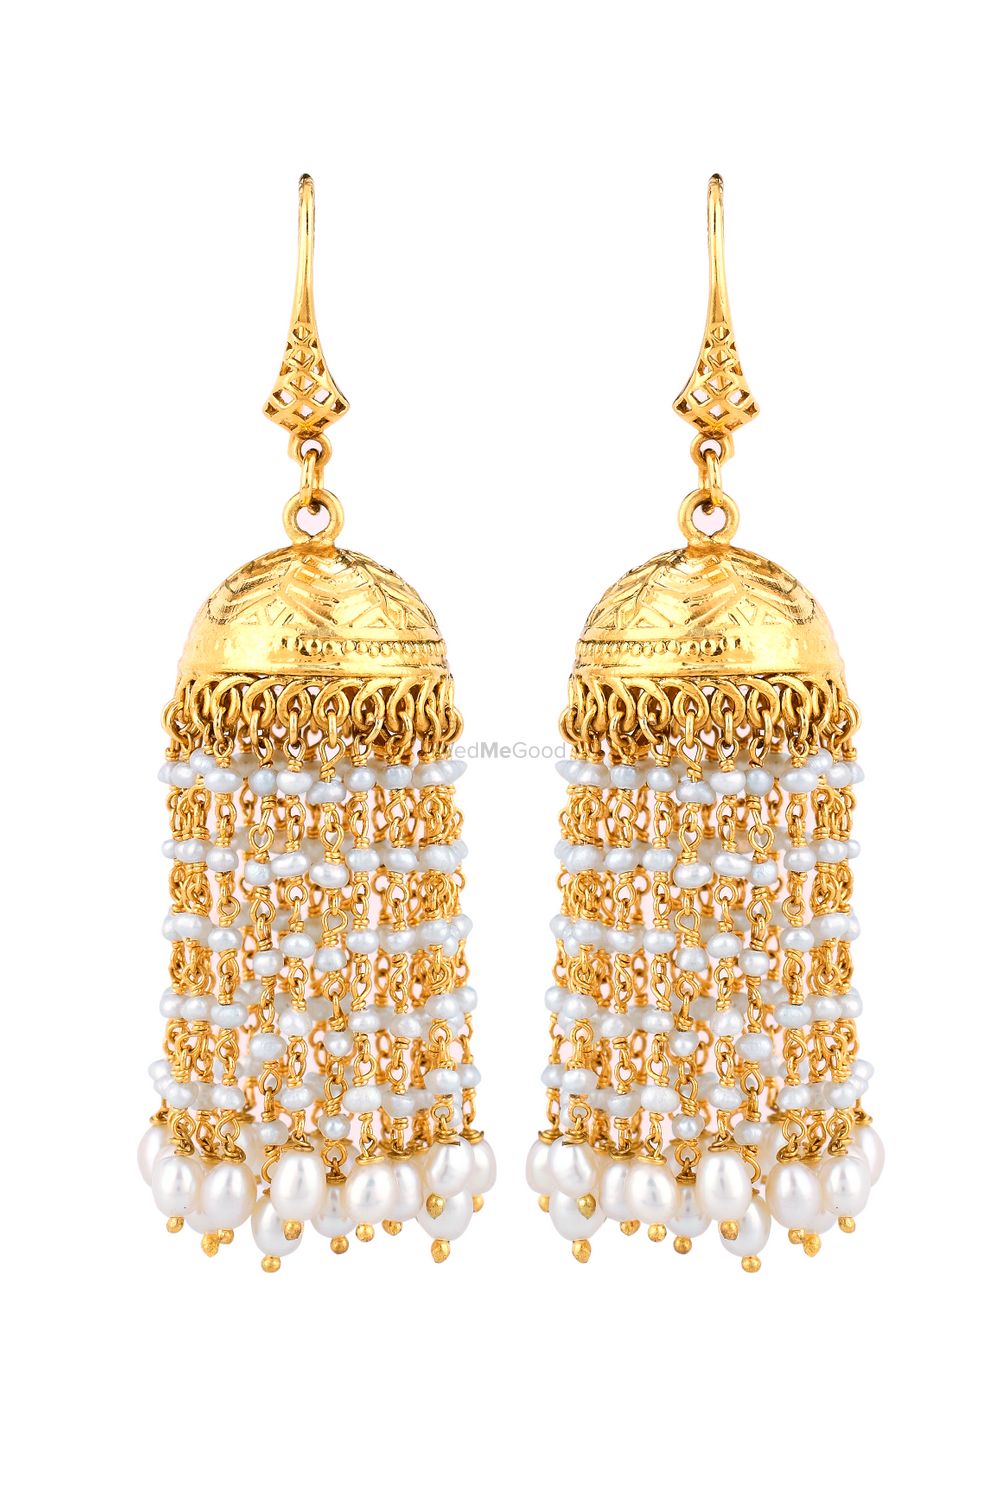 Photo of gold jhumkis earrings